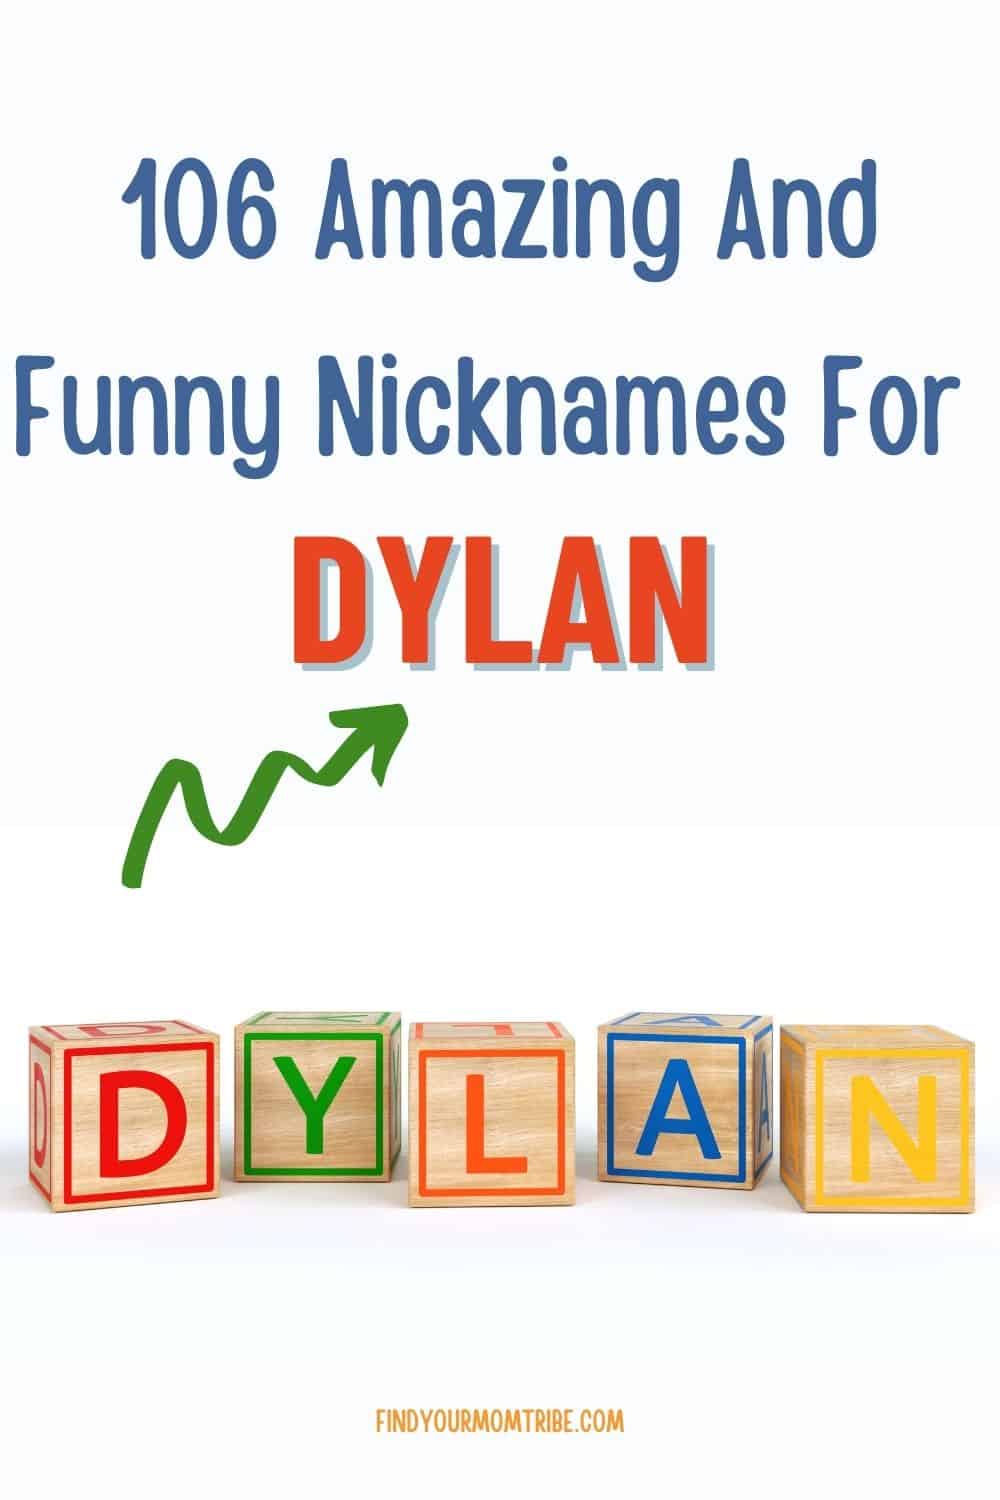 106 Amazing And Funny Nicknames For Dylan